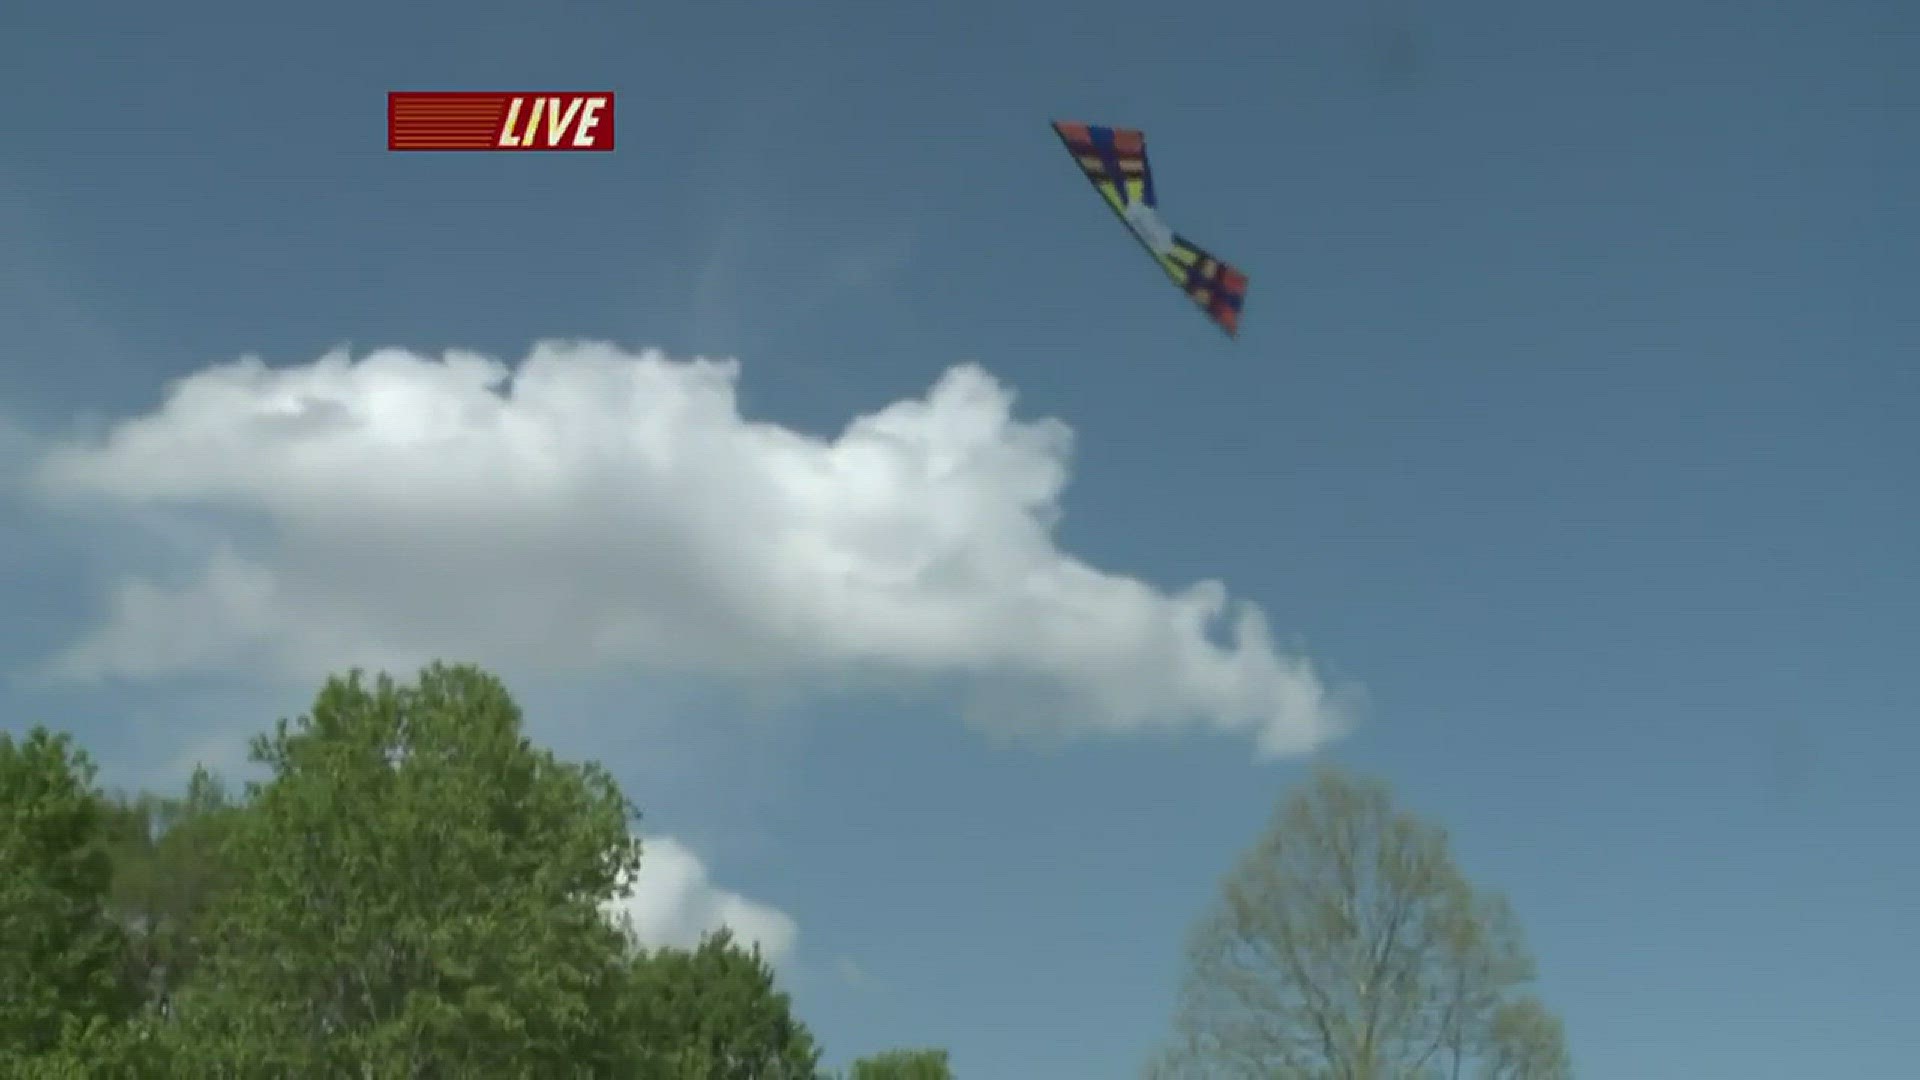 The kite festival will be at Pearsons Springs Park in Maryville from 10 a.m. to 4:30 p.m.